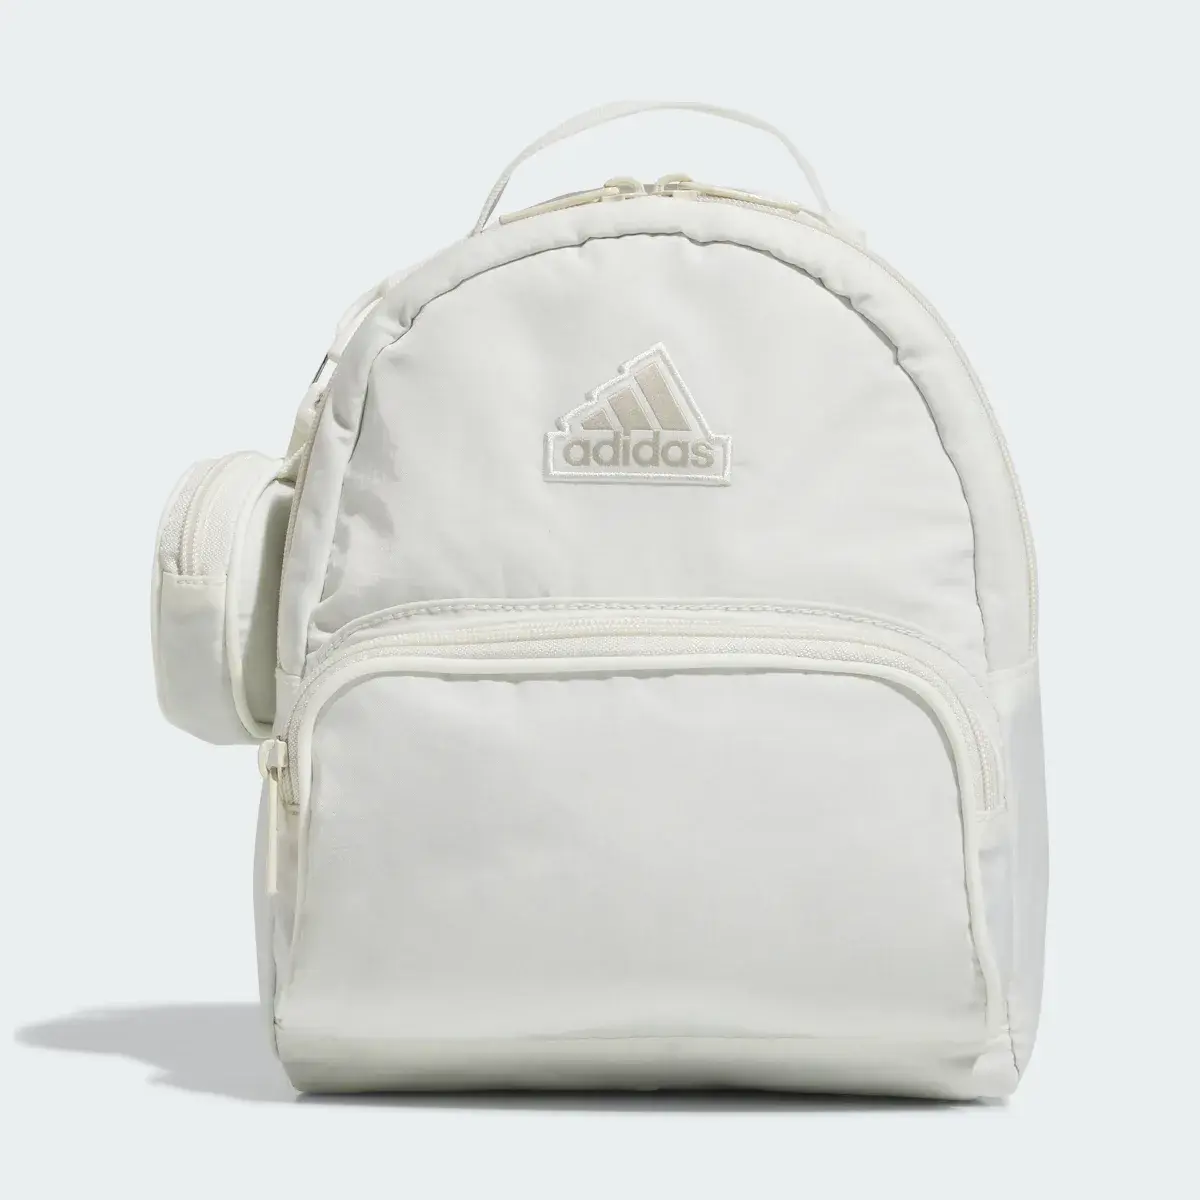 Adidas Must-Have Mini Backpack. 2